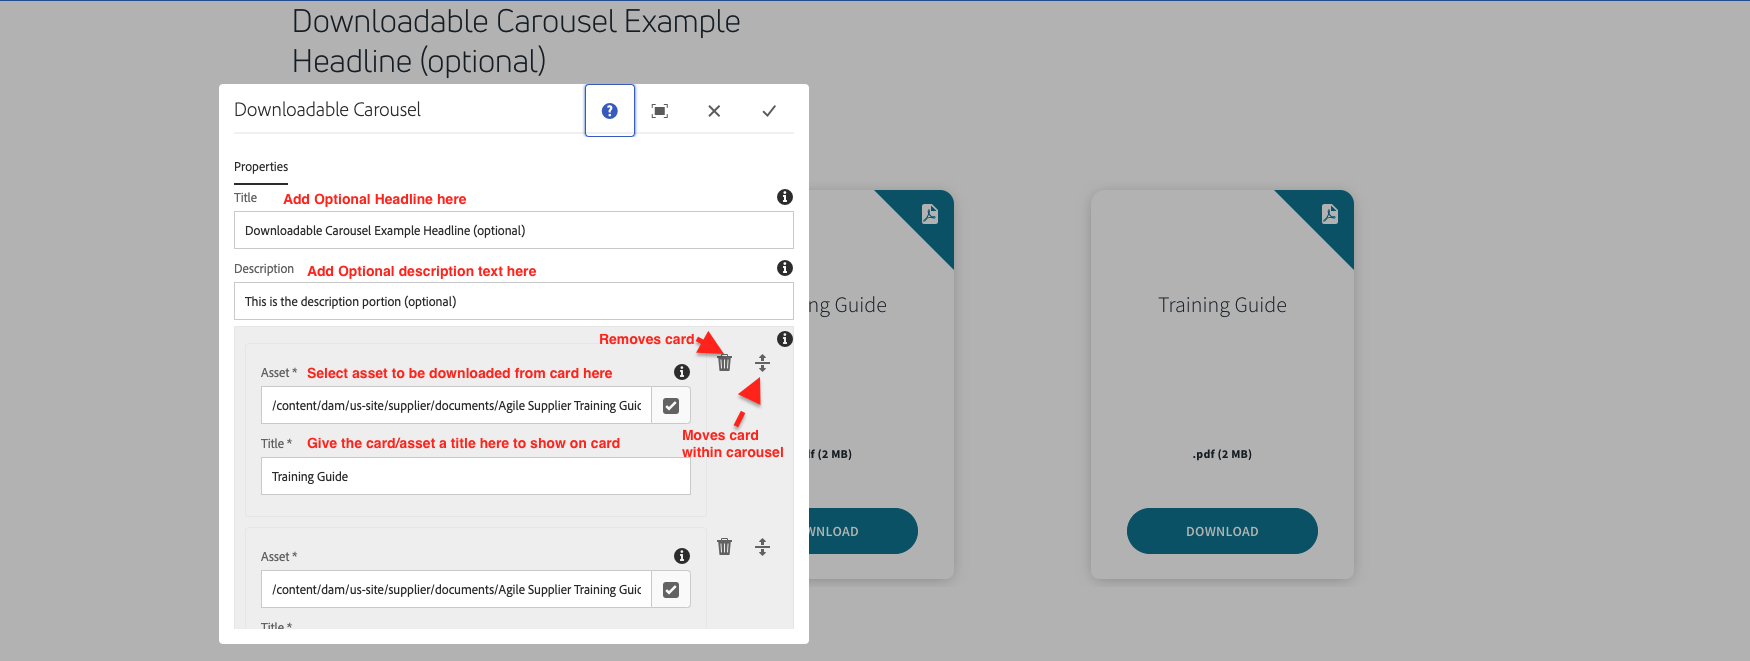 Downloadable Carousel Authoring Experience One